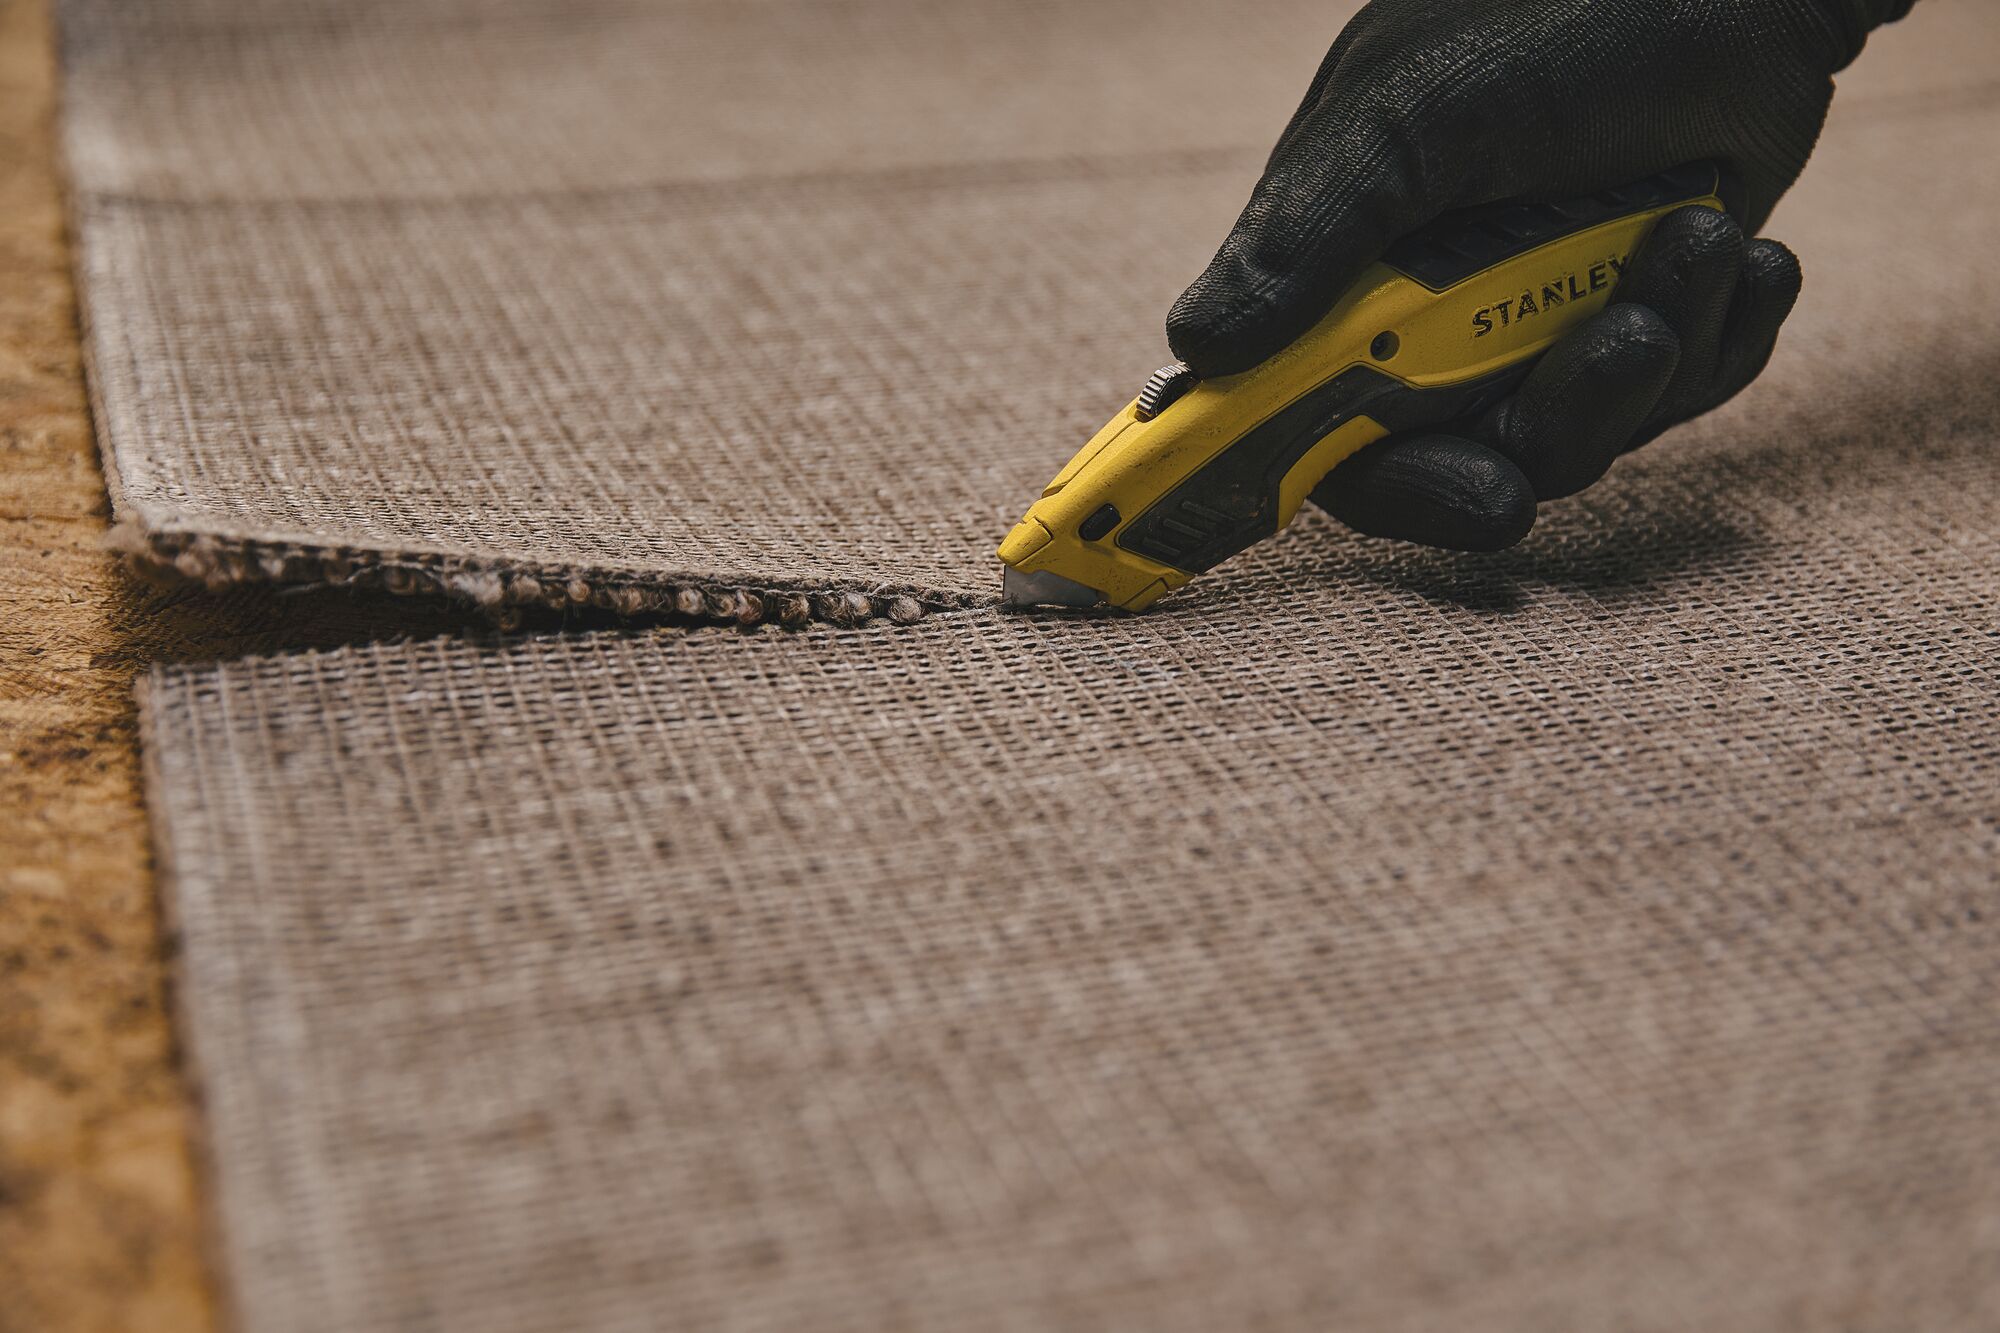 Retractable Utility Knife being used for cutting carpet.